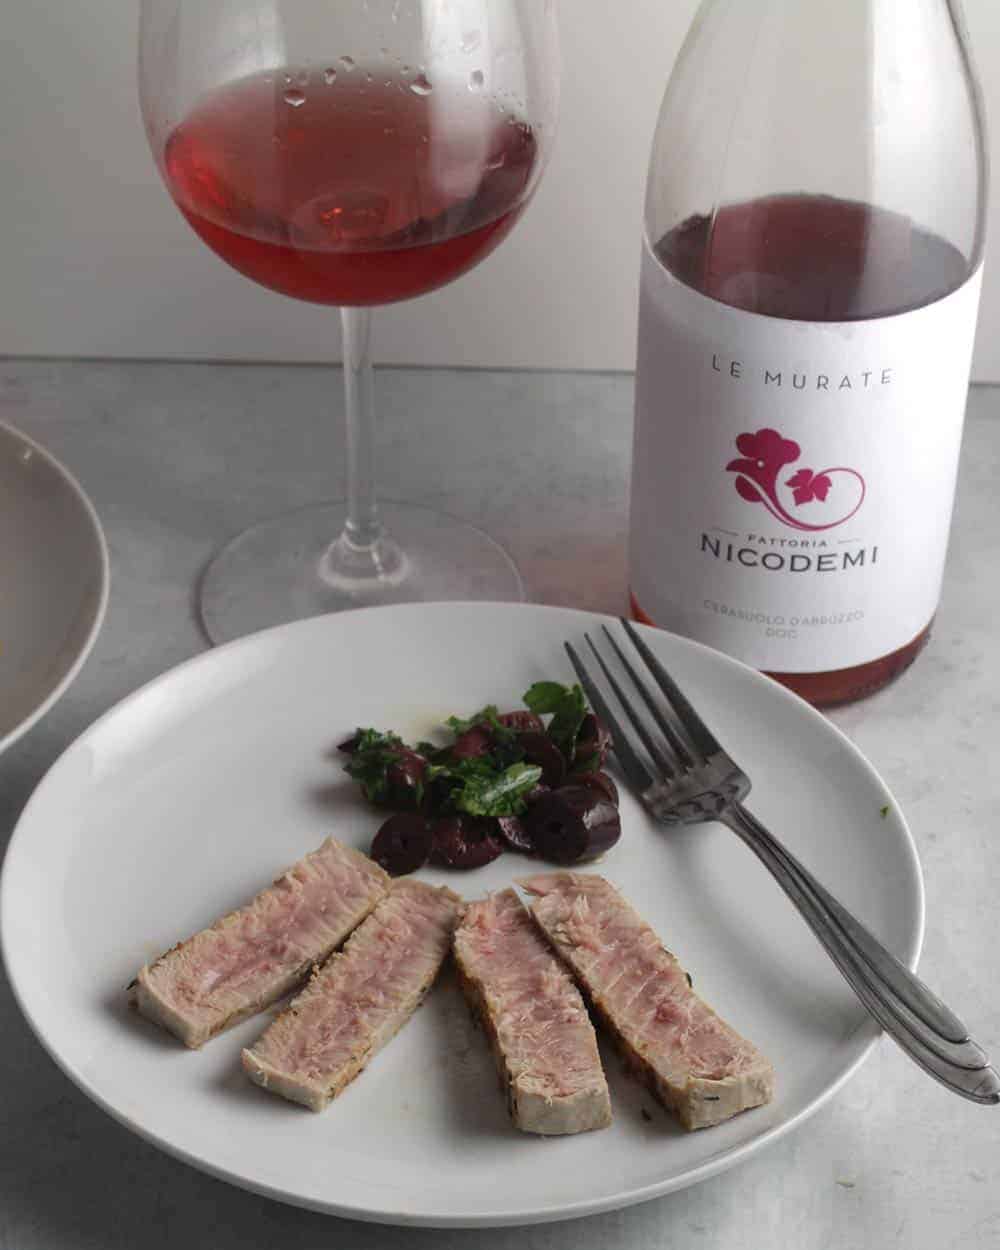 pan seared tuna with olive relish pairs very well with Cerasualo rosé wine from Abruzzo. #winepairing #rosewine